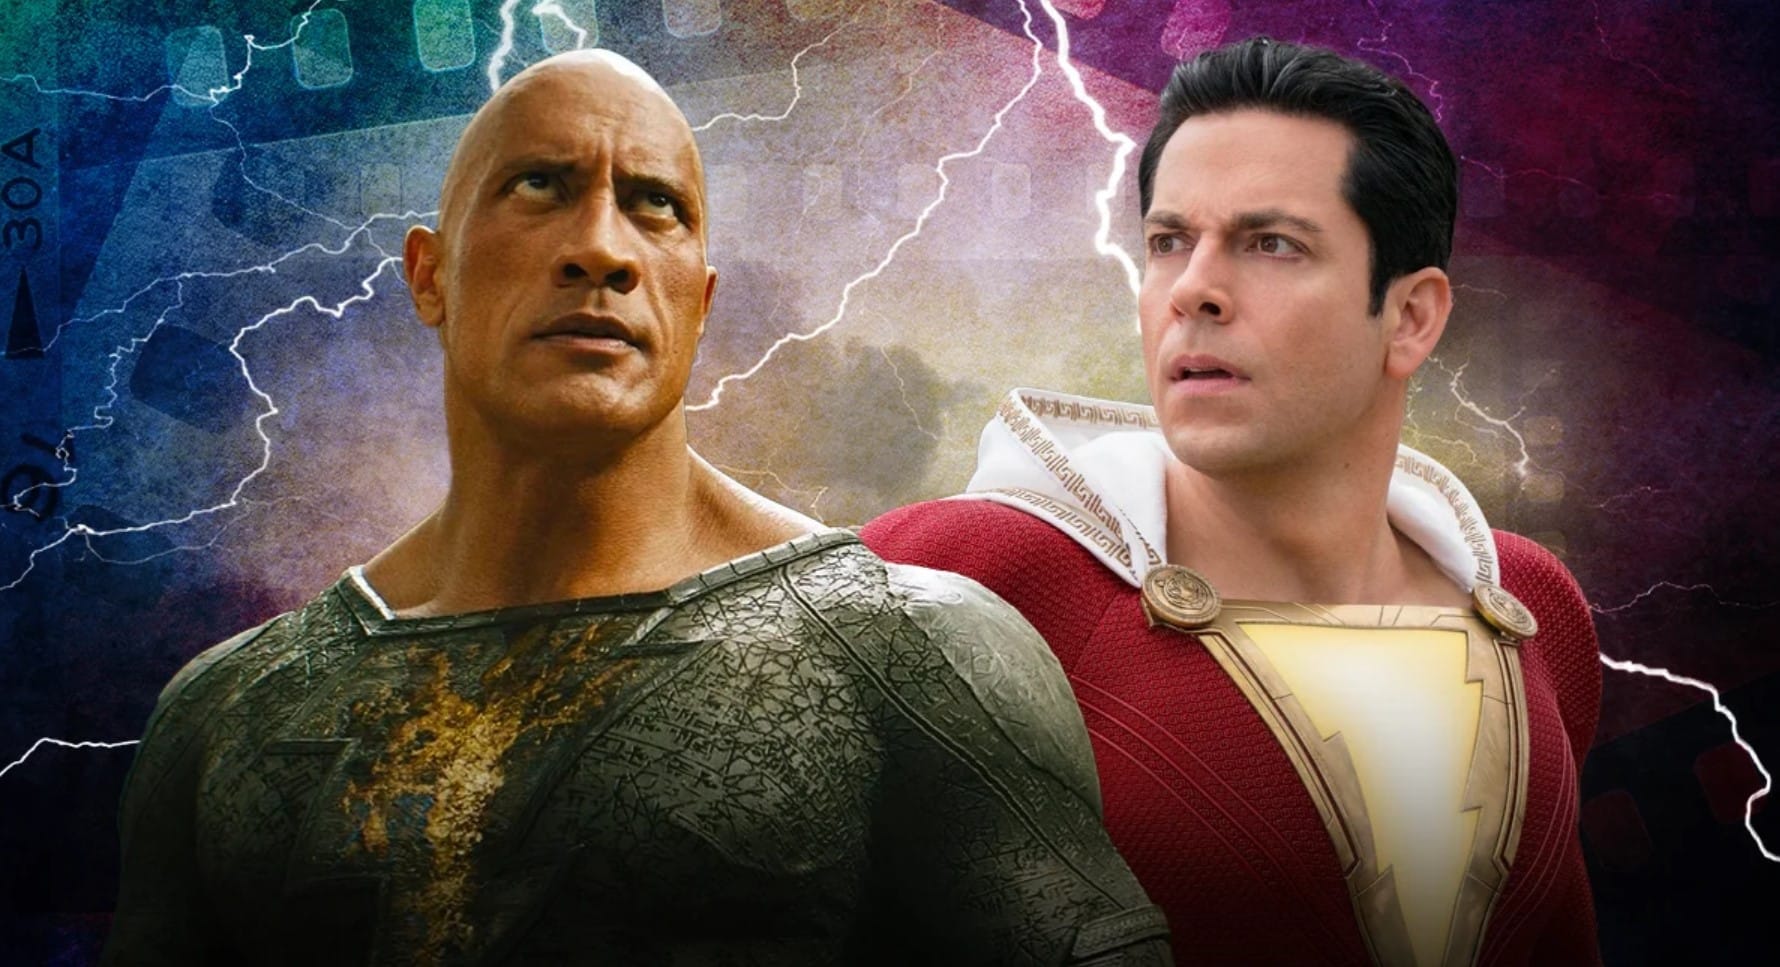 Zachary Levi (Shazam!) confirms The Rock blocked the appearance of several characters in Shazam 2